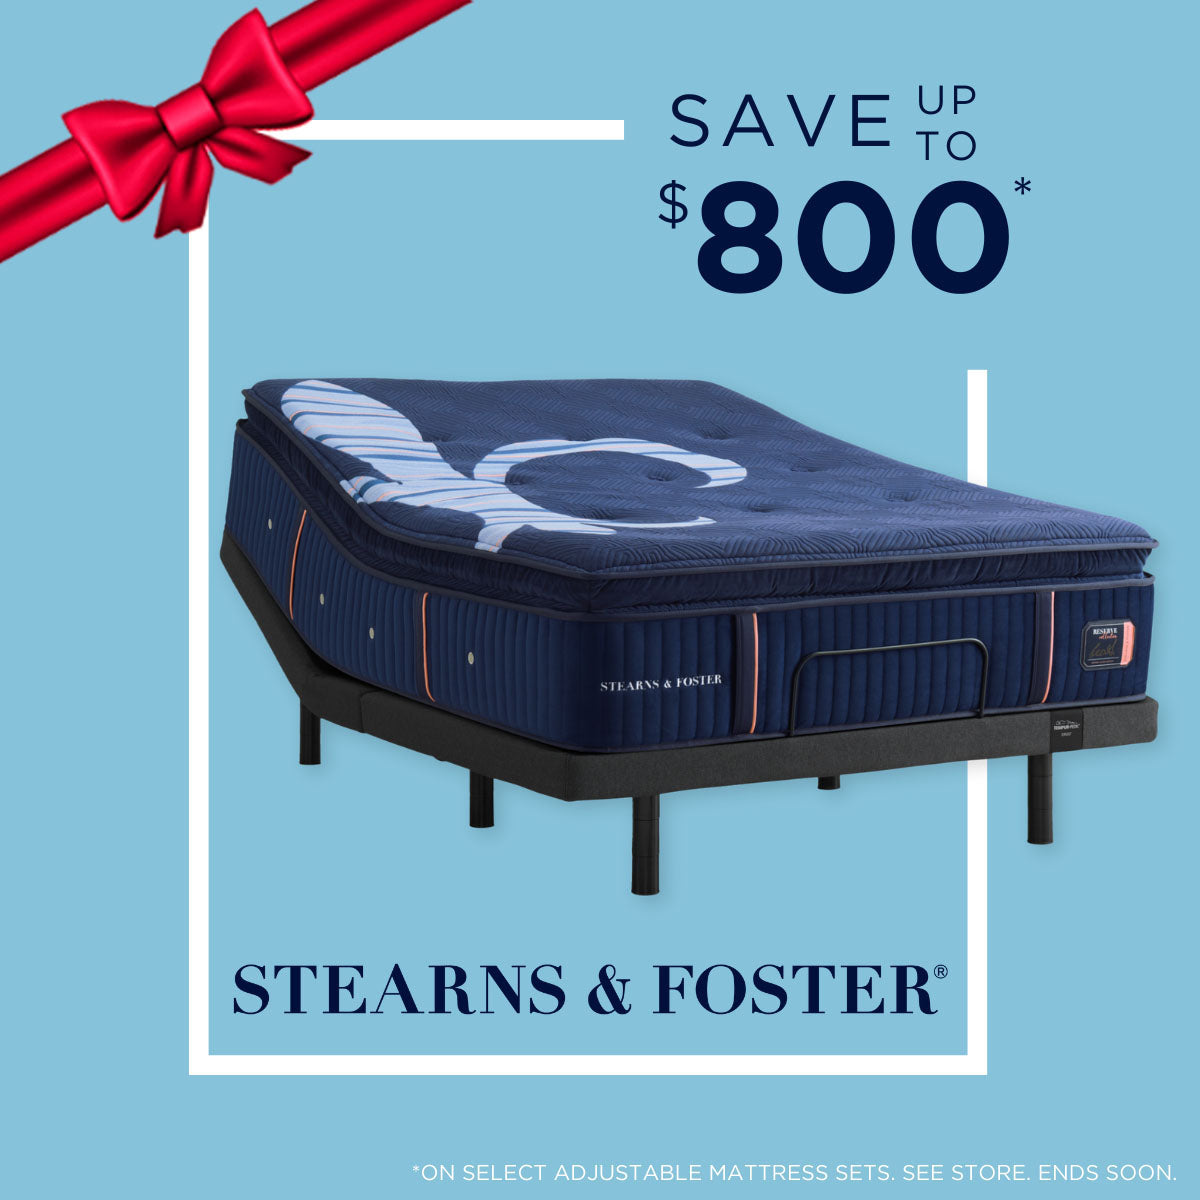 Sleepology Mattress Black Friday Event. Save up to $800 on Stearns & Foster